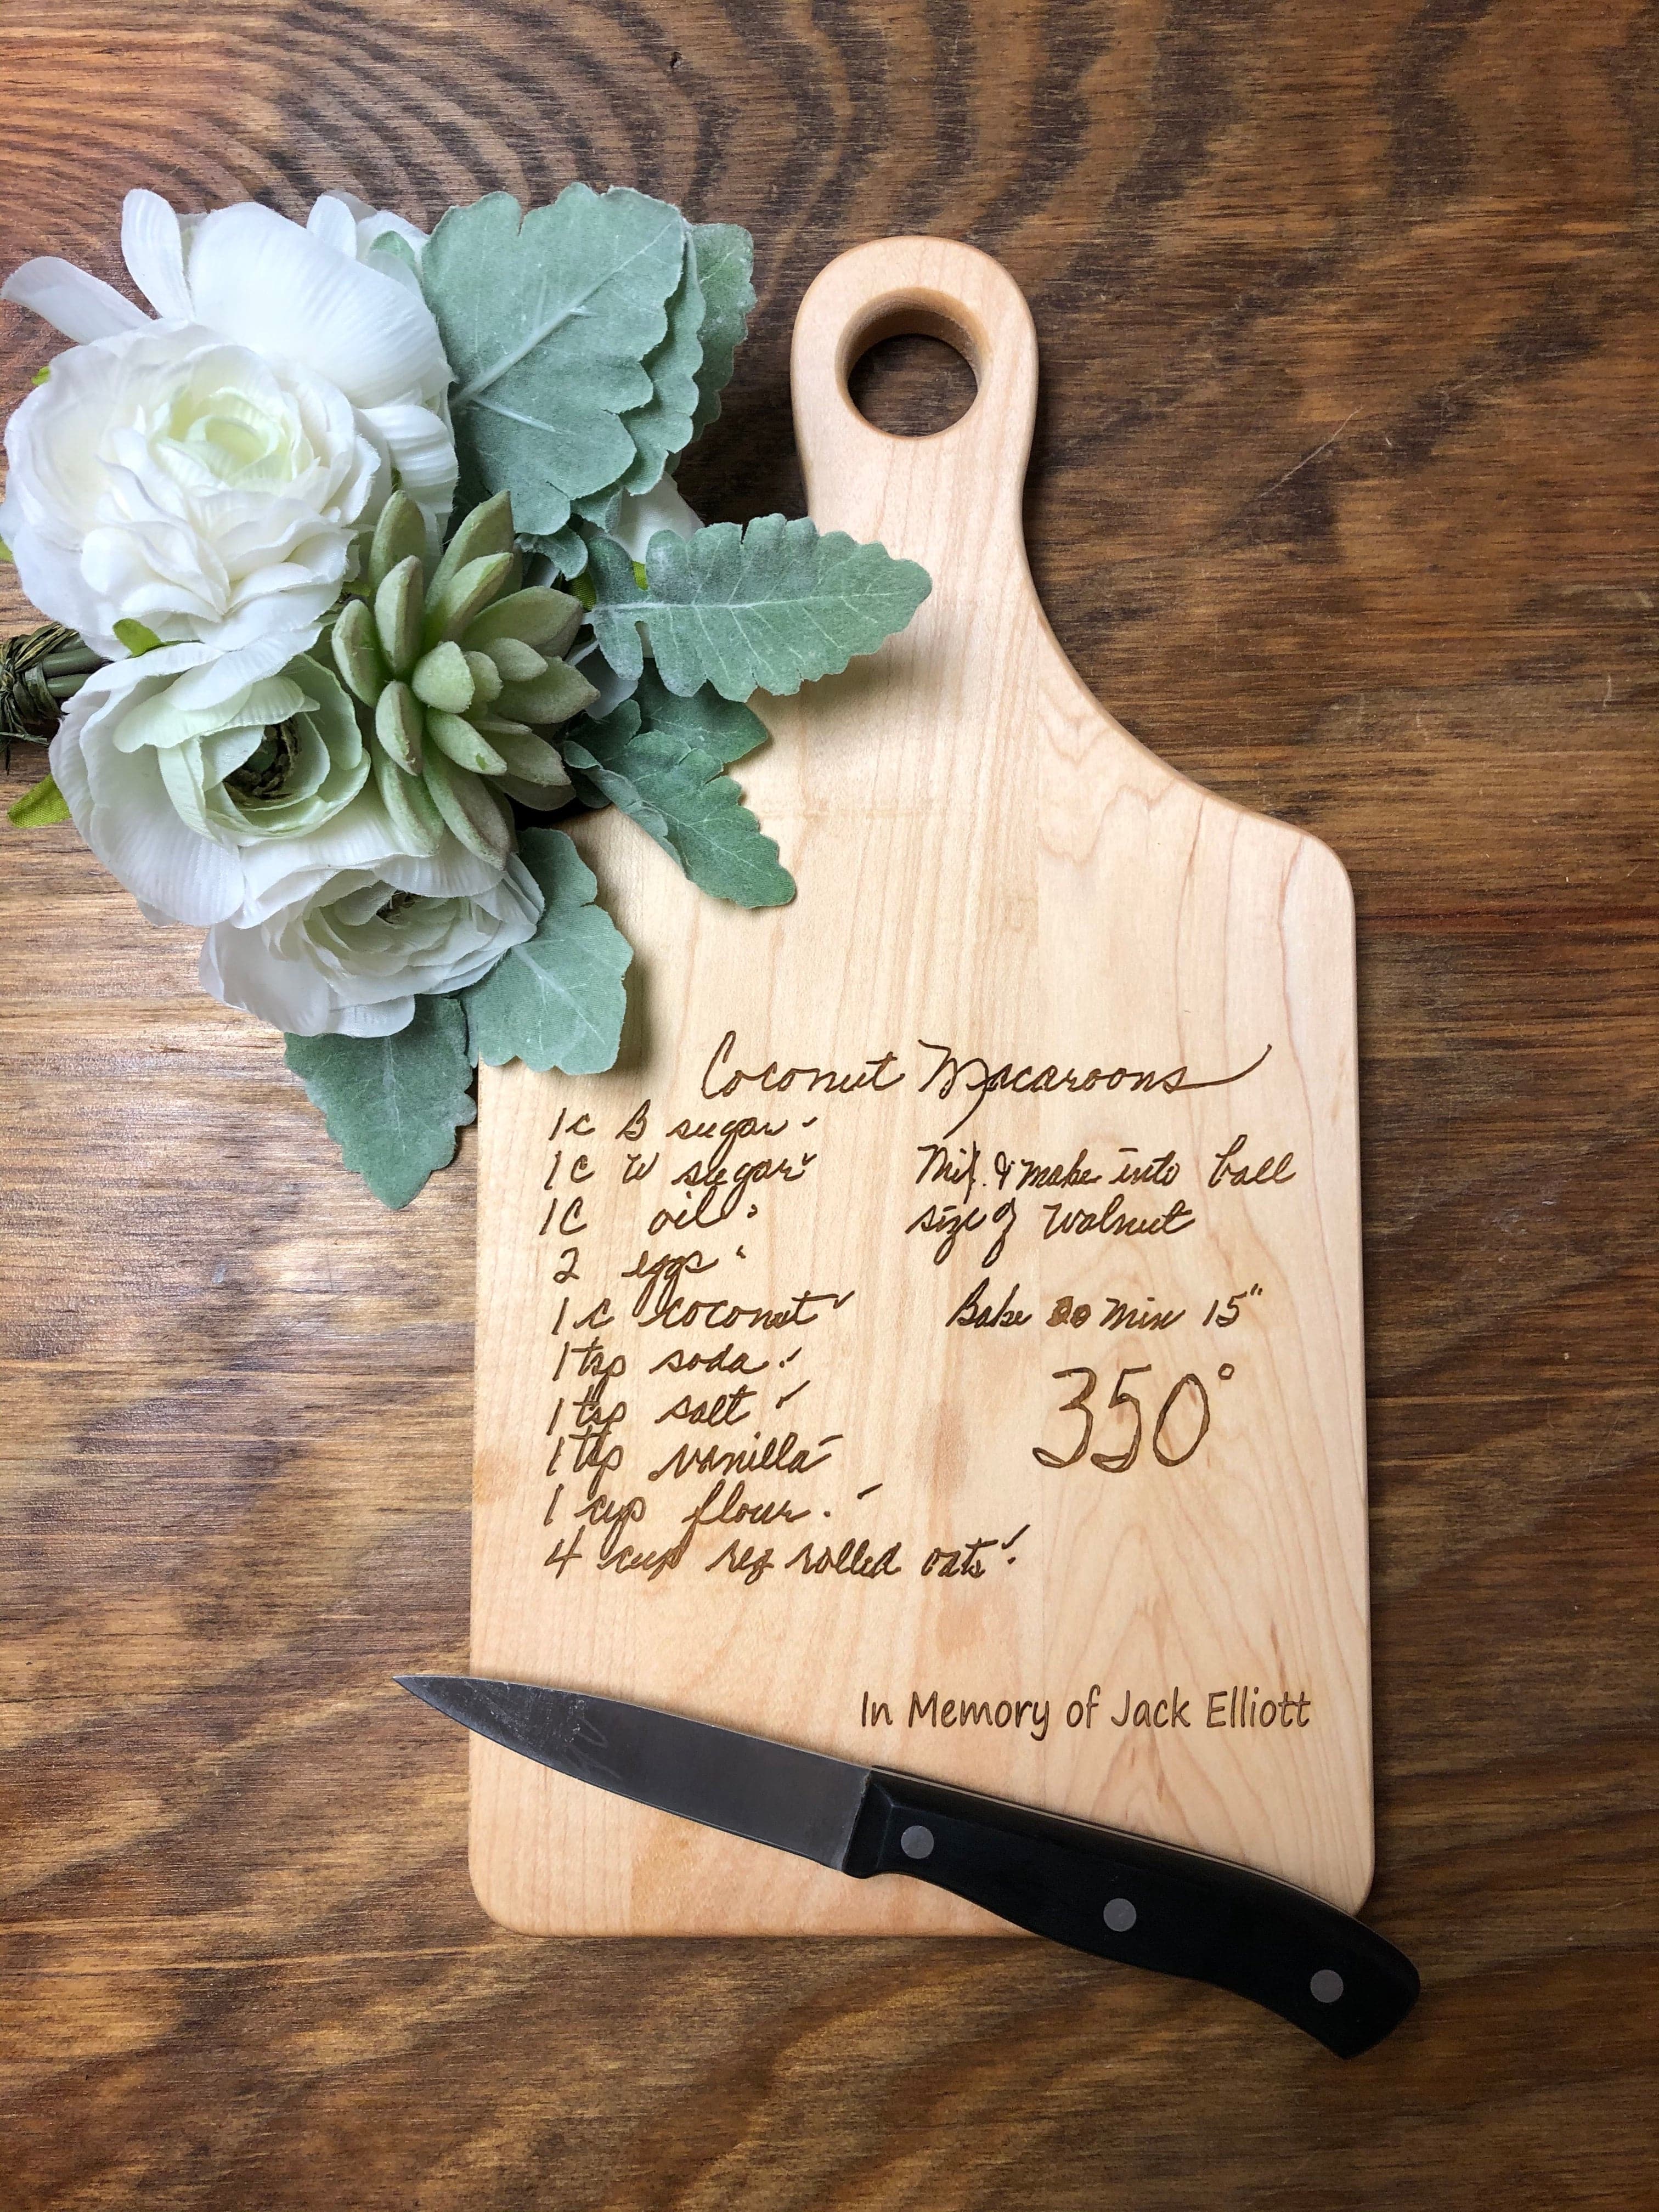 Hand Carved Sardinian Chopping Board - Small Ekseption